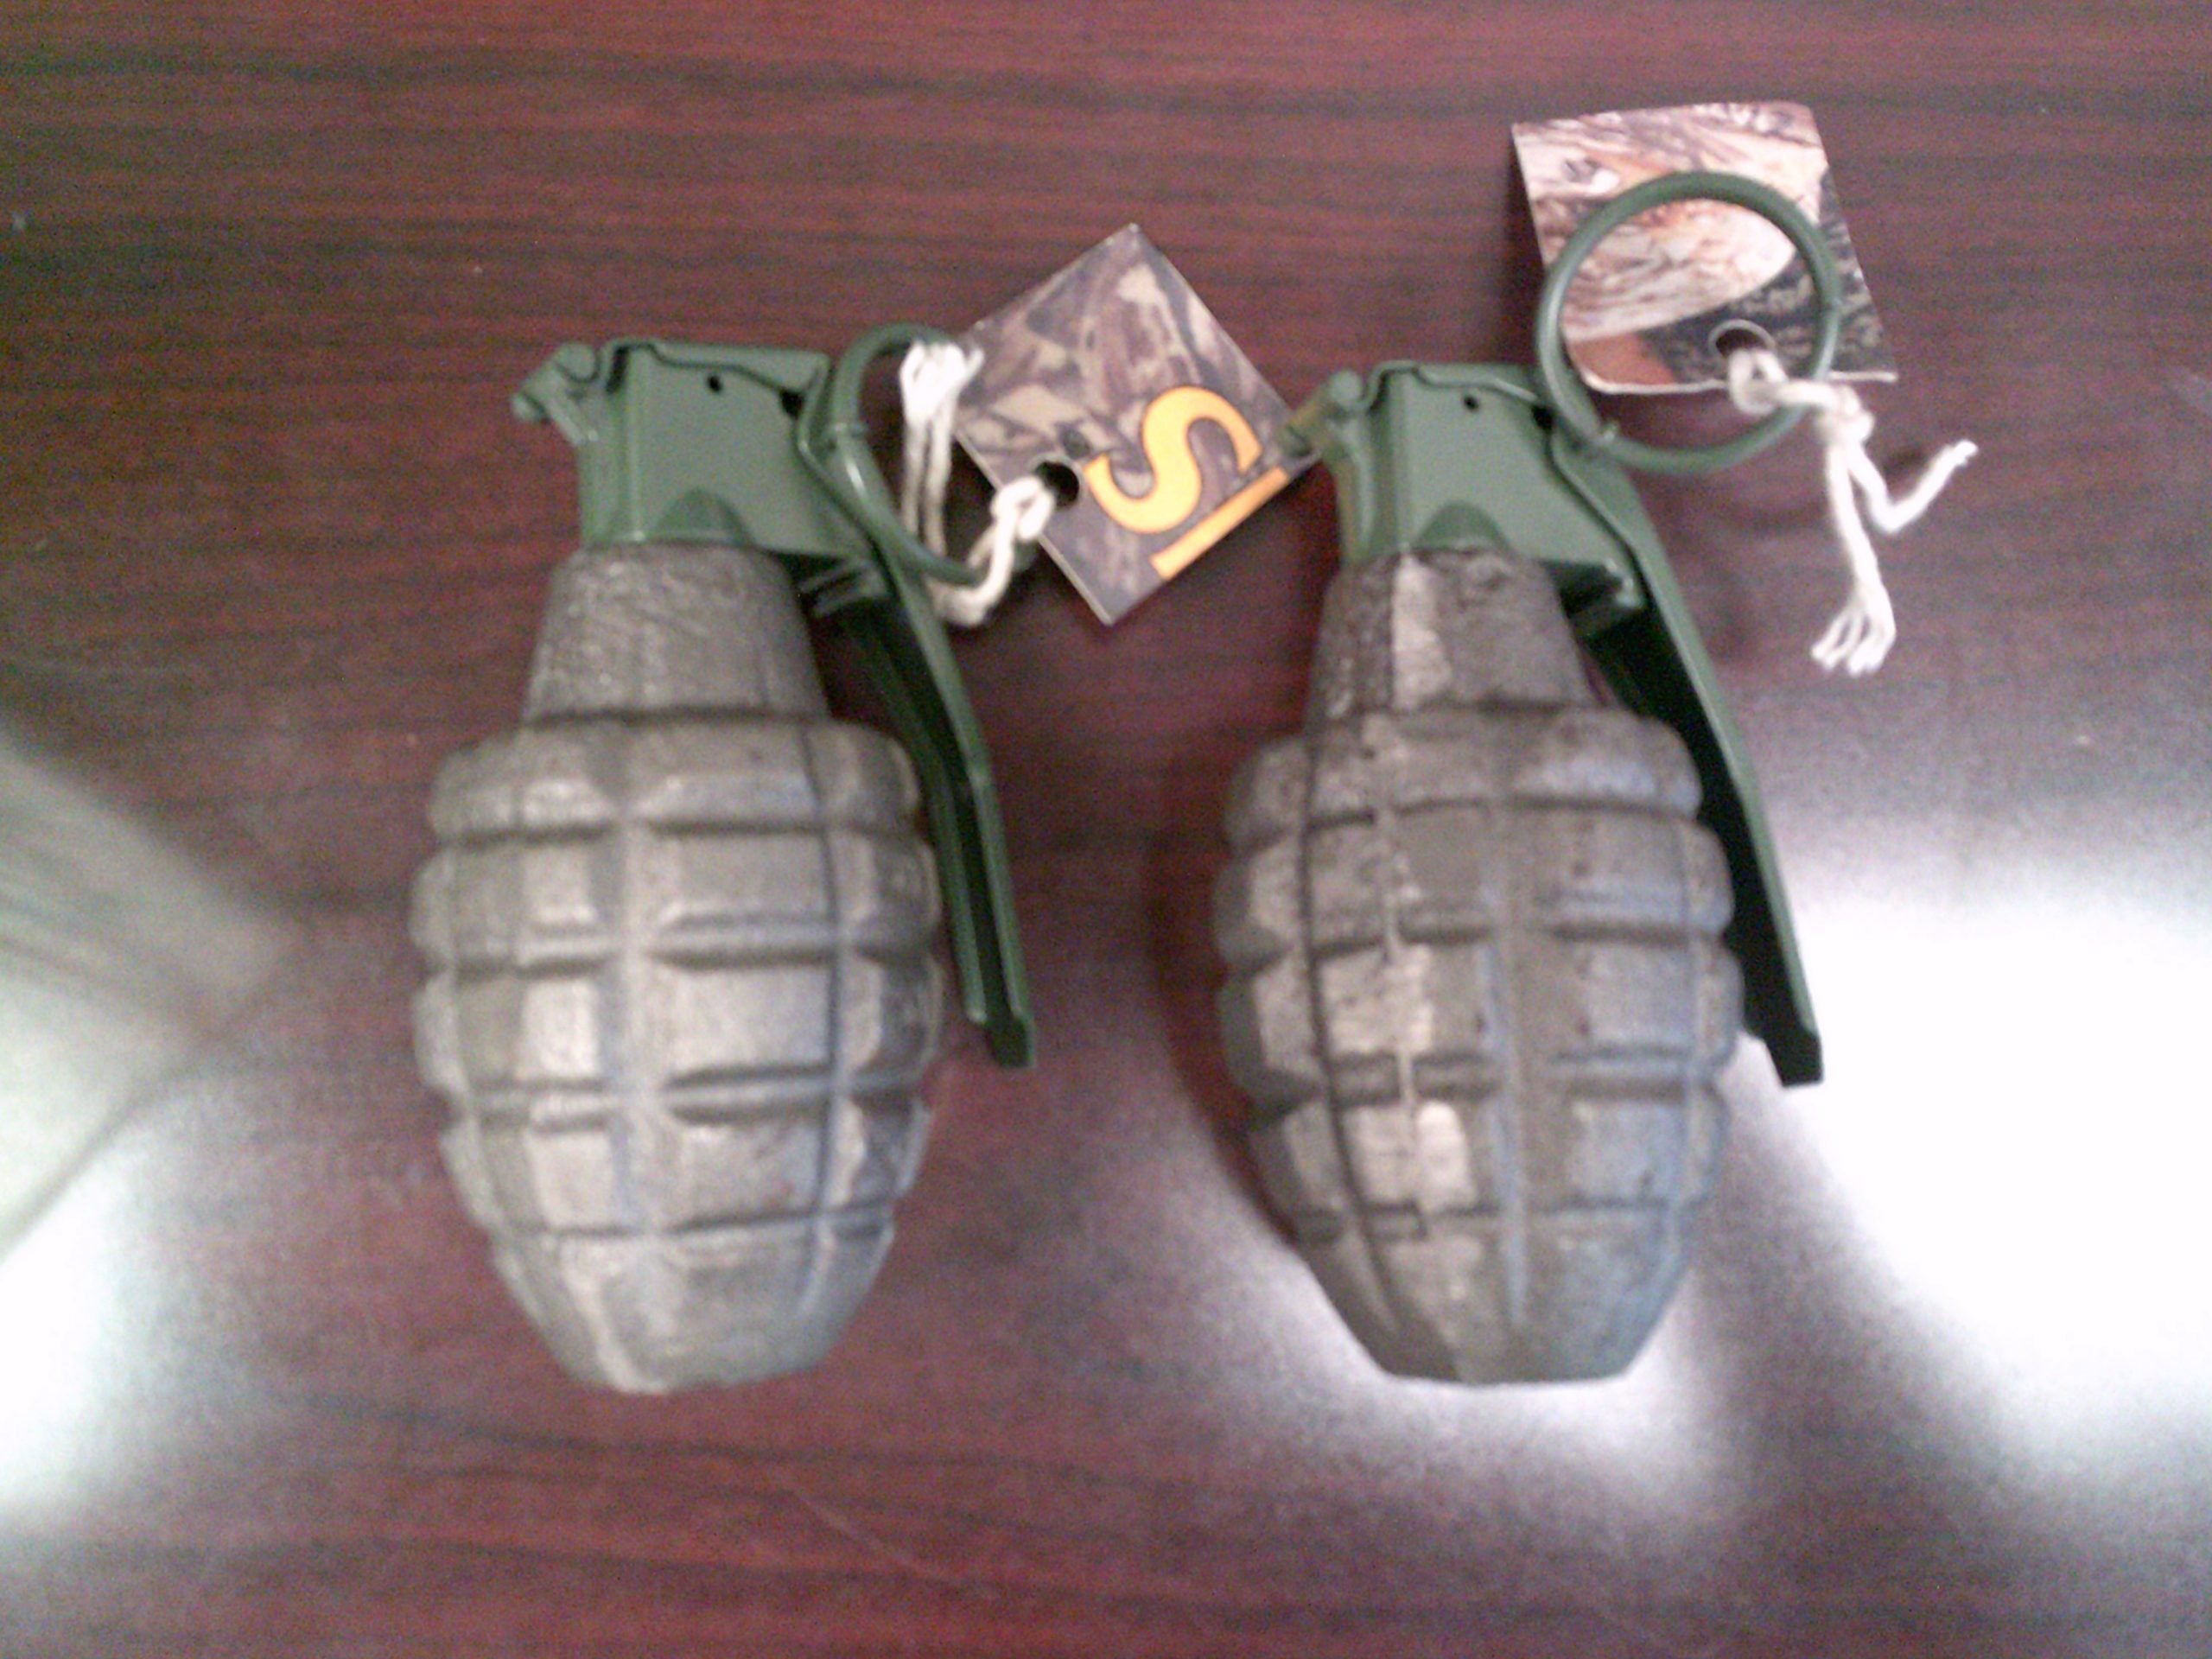 The inert grenades were confiscated by police